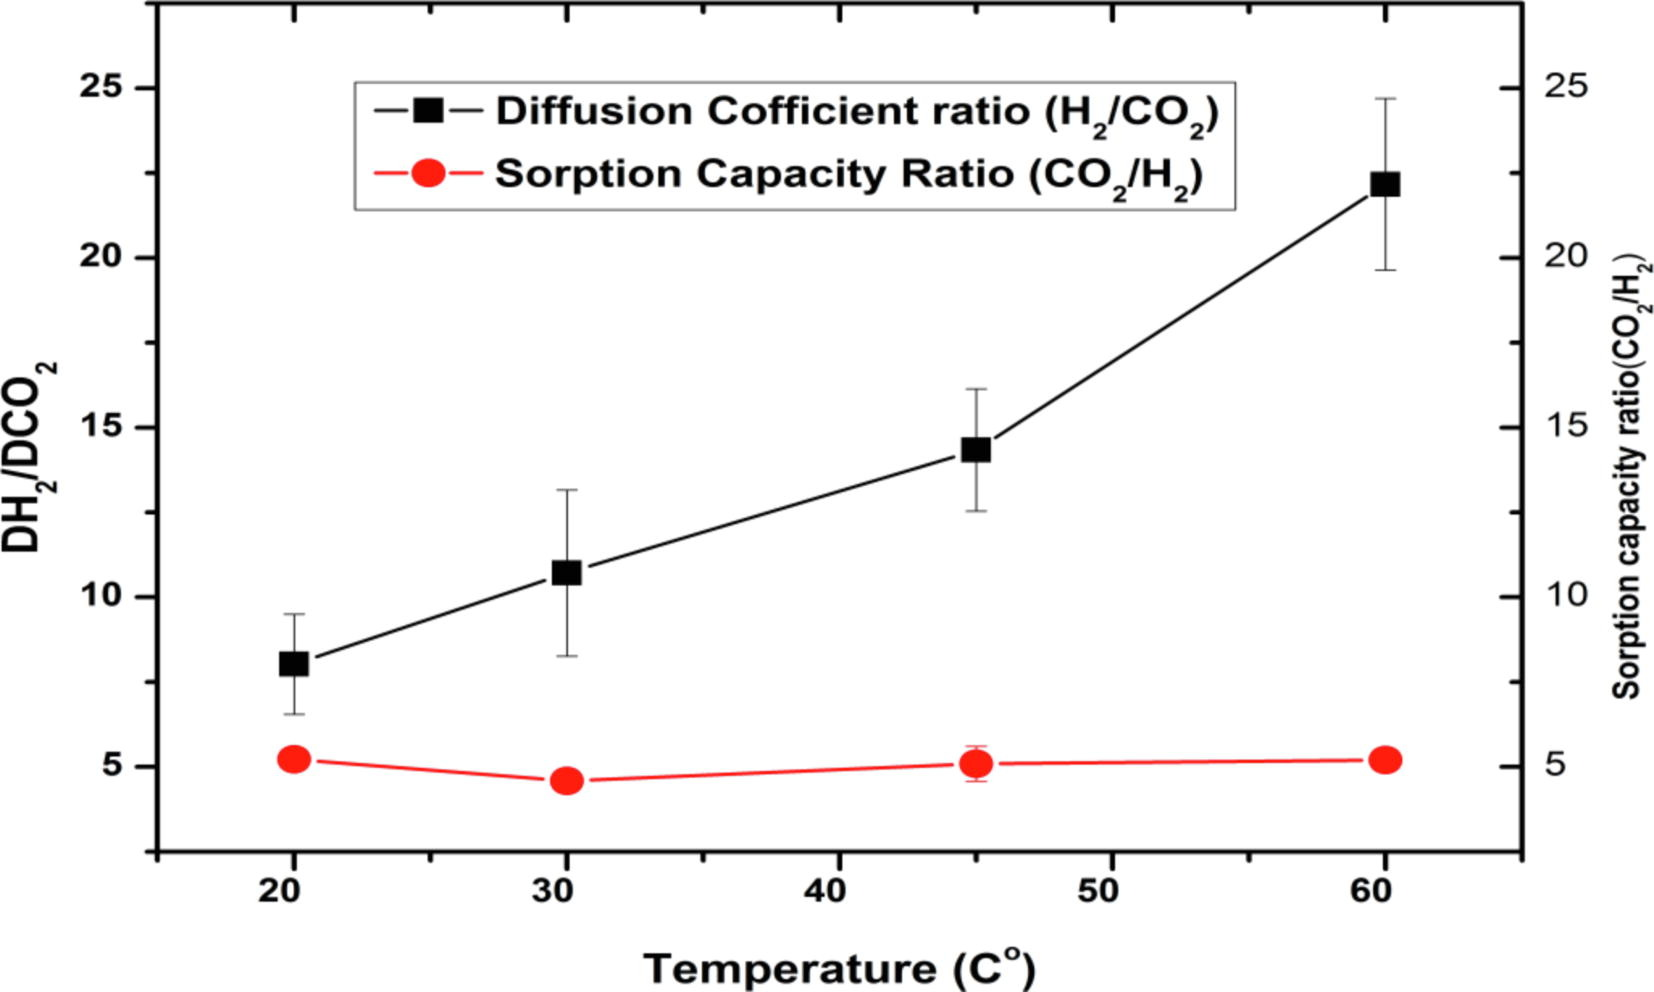 Diffusion coefficient ratio (H2/CO2) and sorption capacity ratio (CO2/H2) at different temperatures.